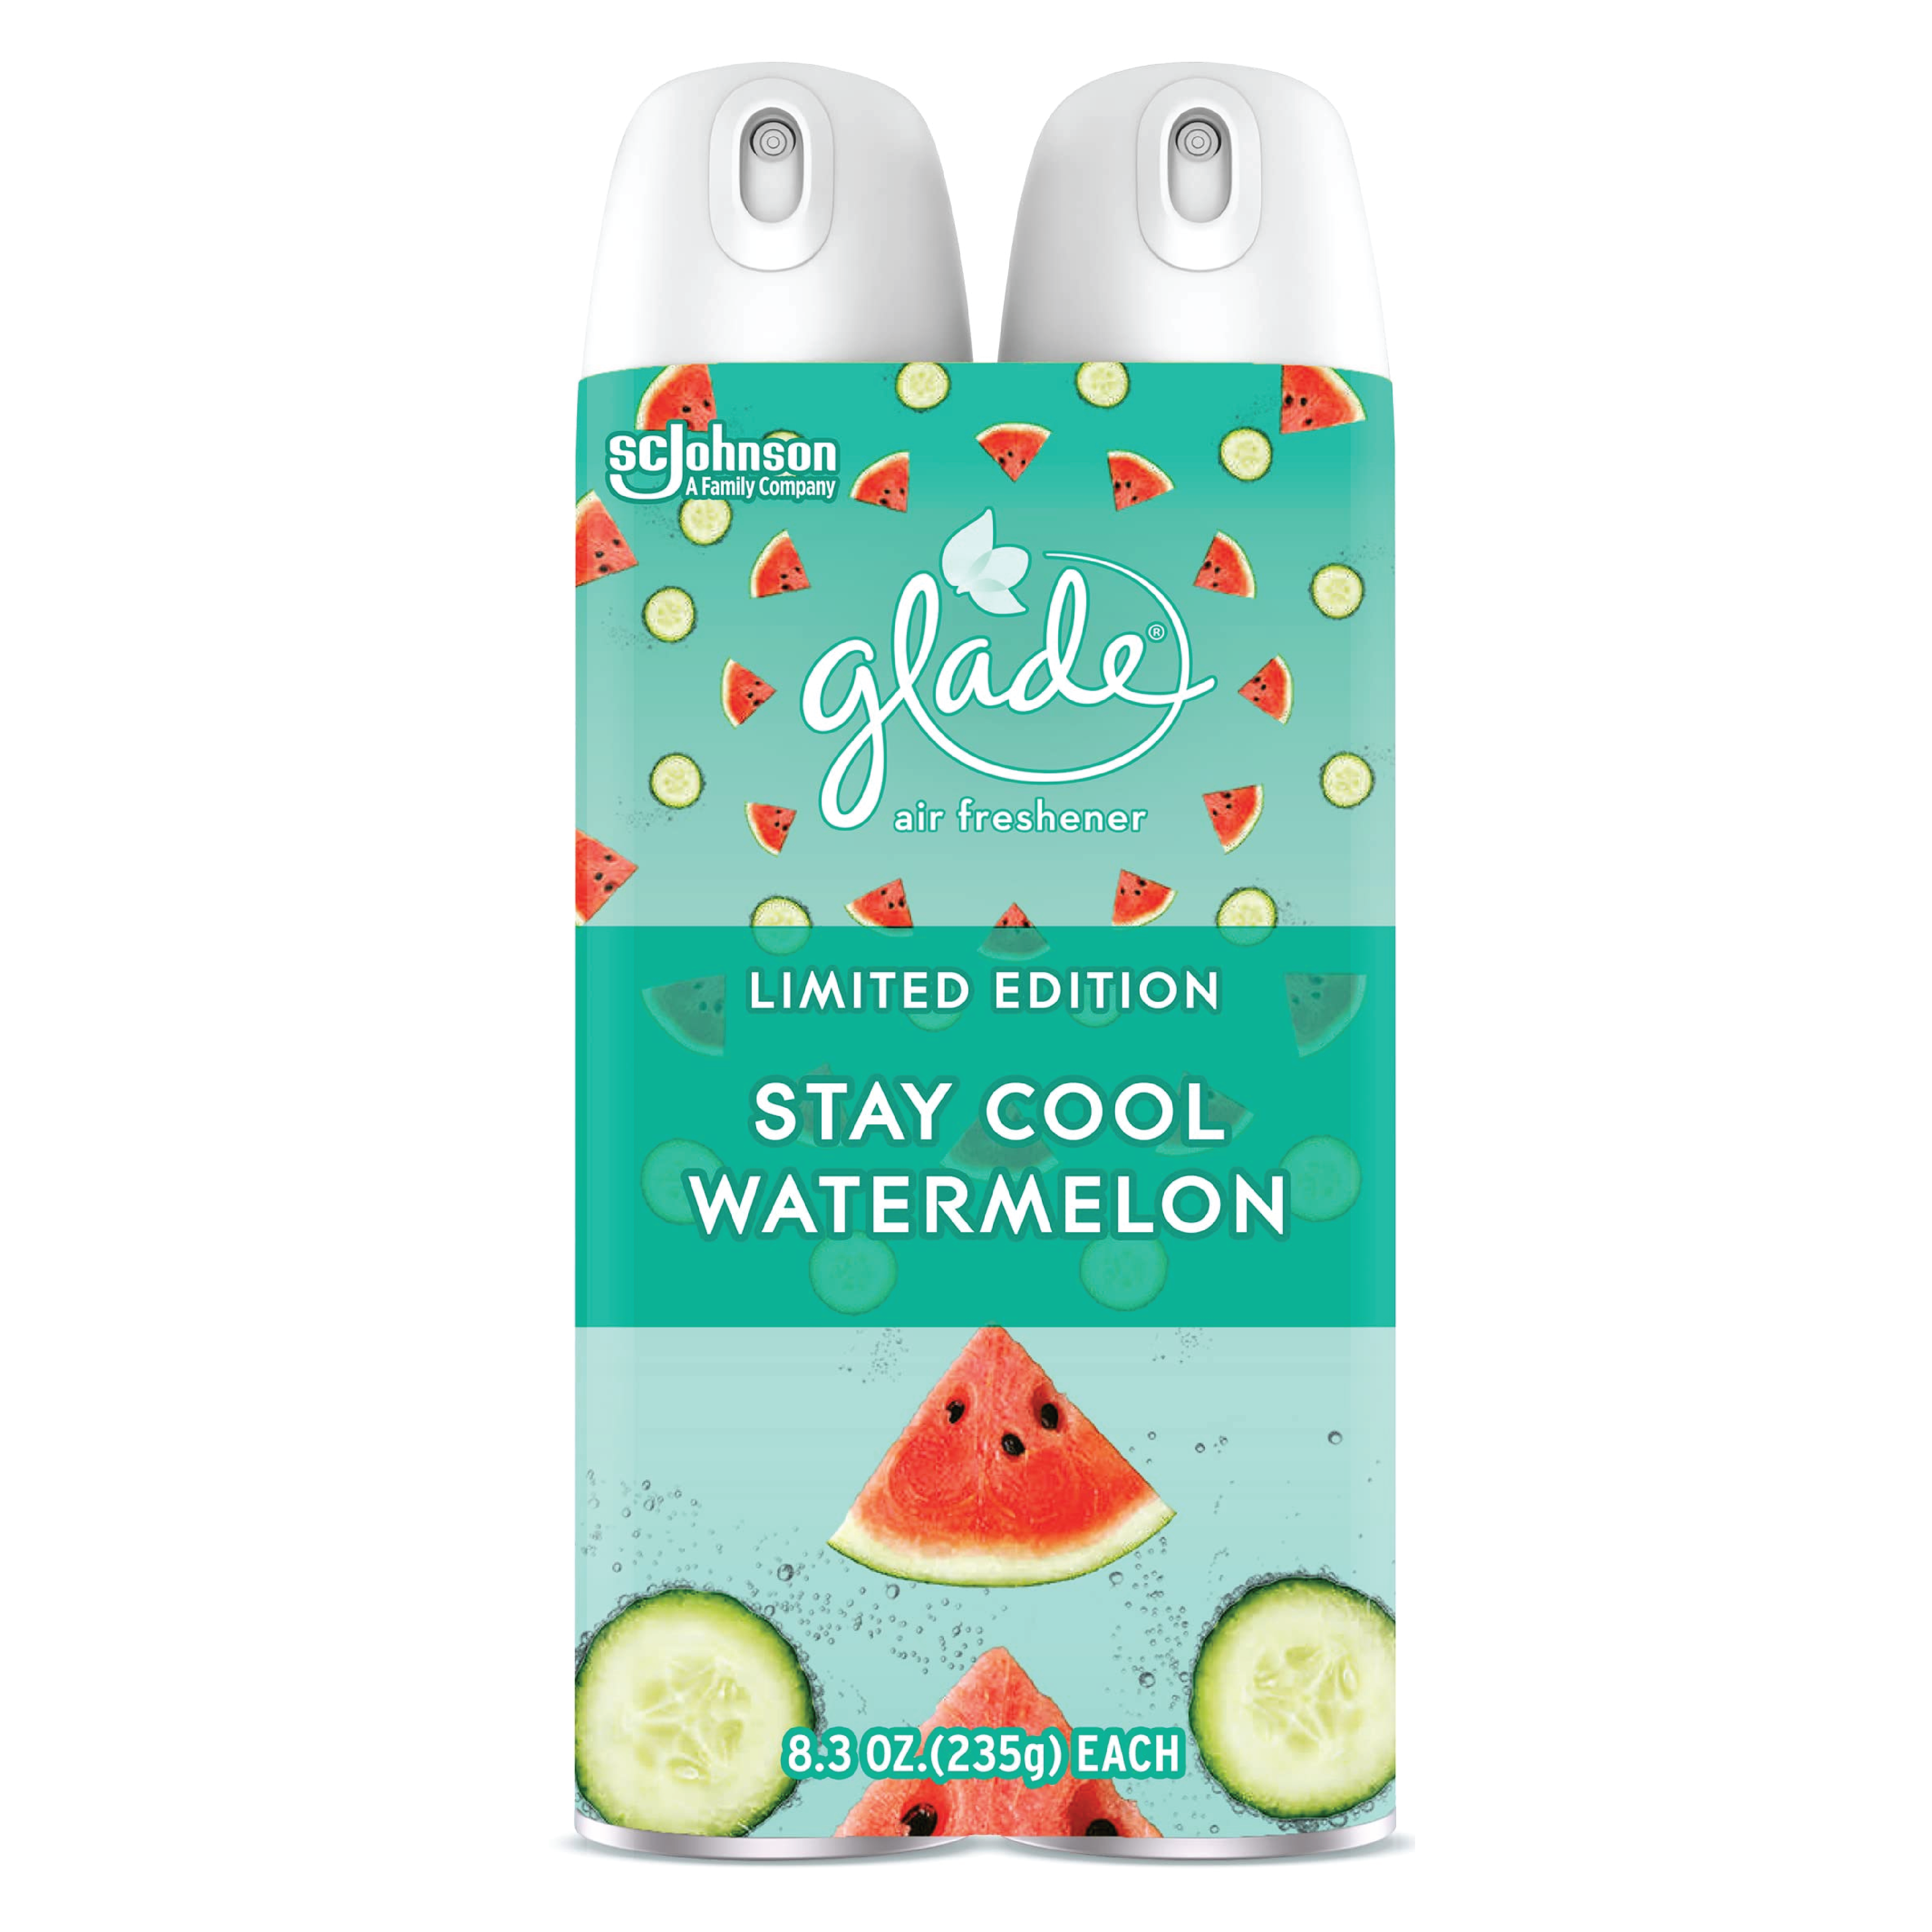 Glade Limited Edition Stay Cool Watermelon Air Freshener 2 Pack